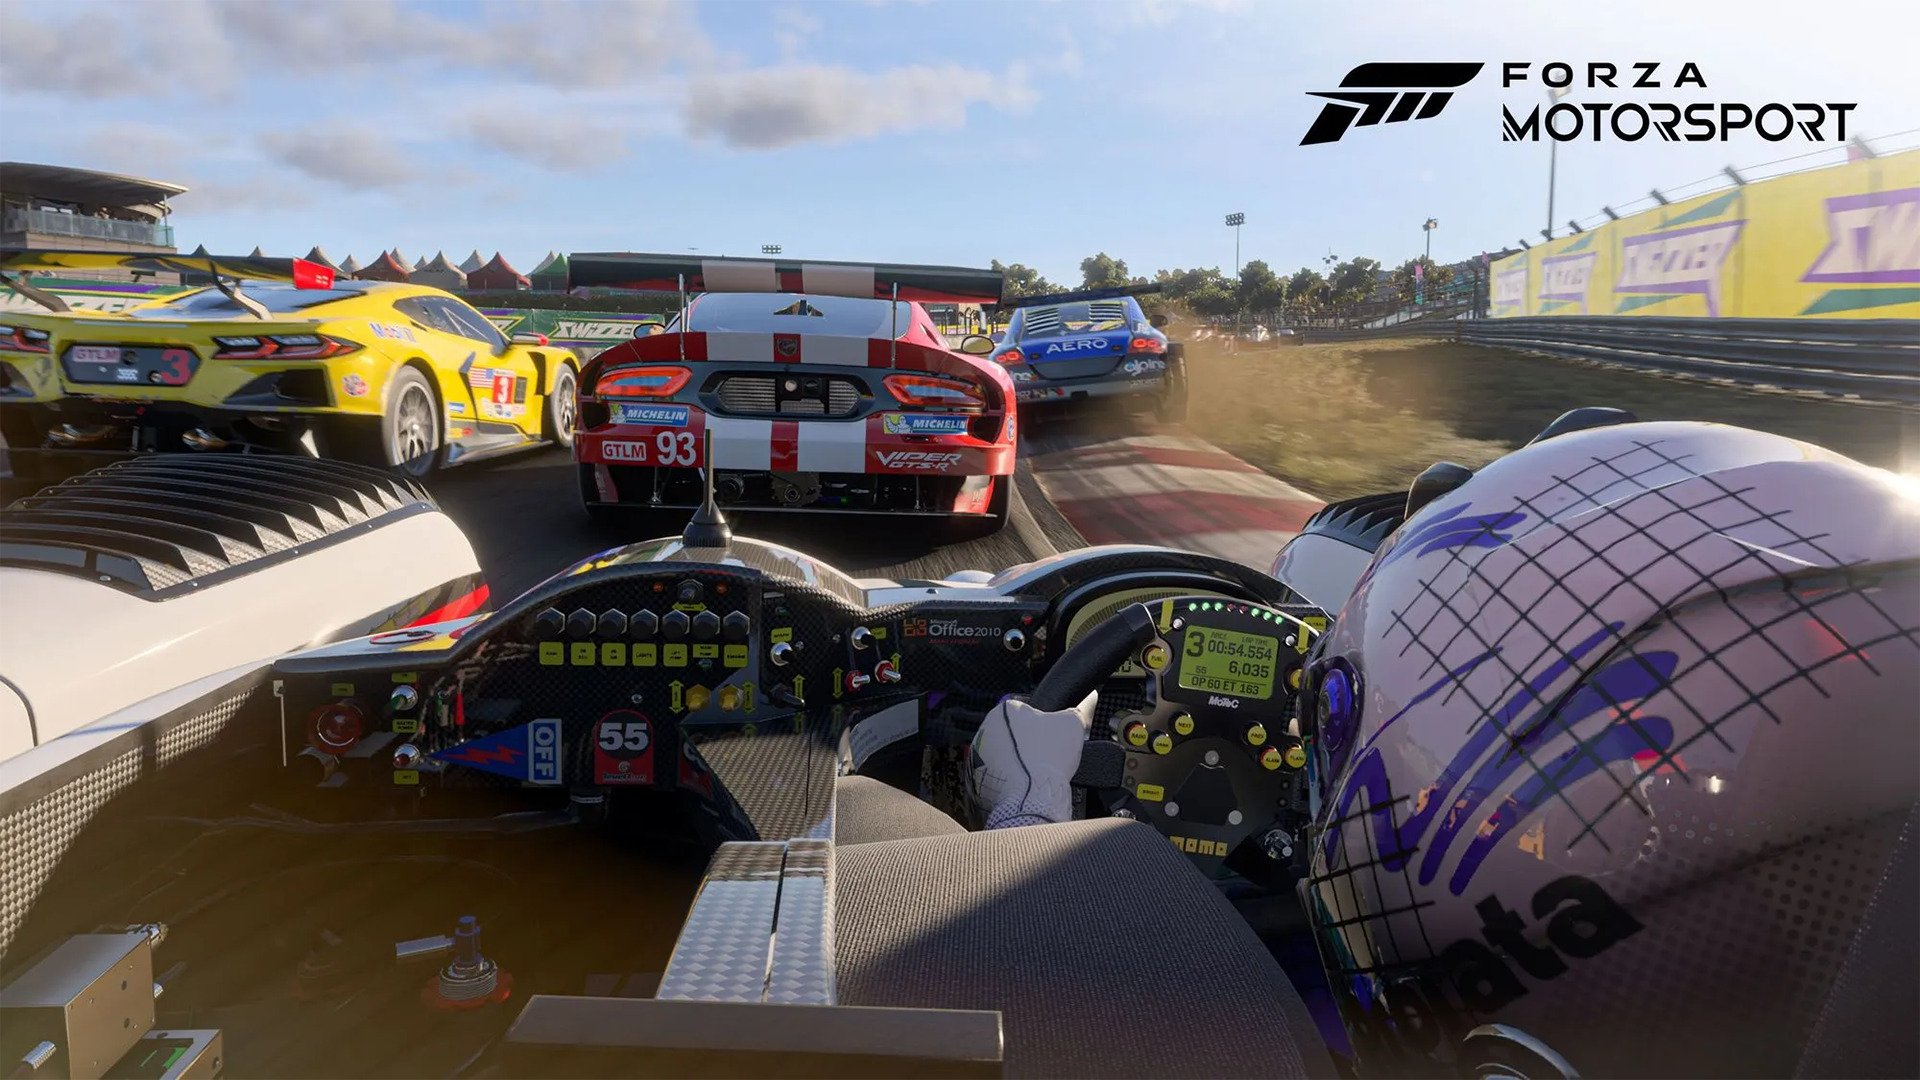 Forza Motorsport Update 2 patch notes: Release date, new track